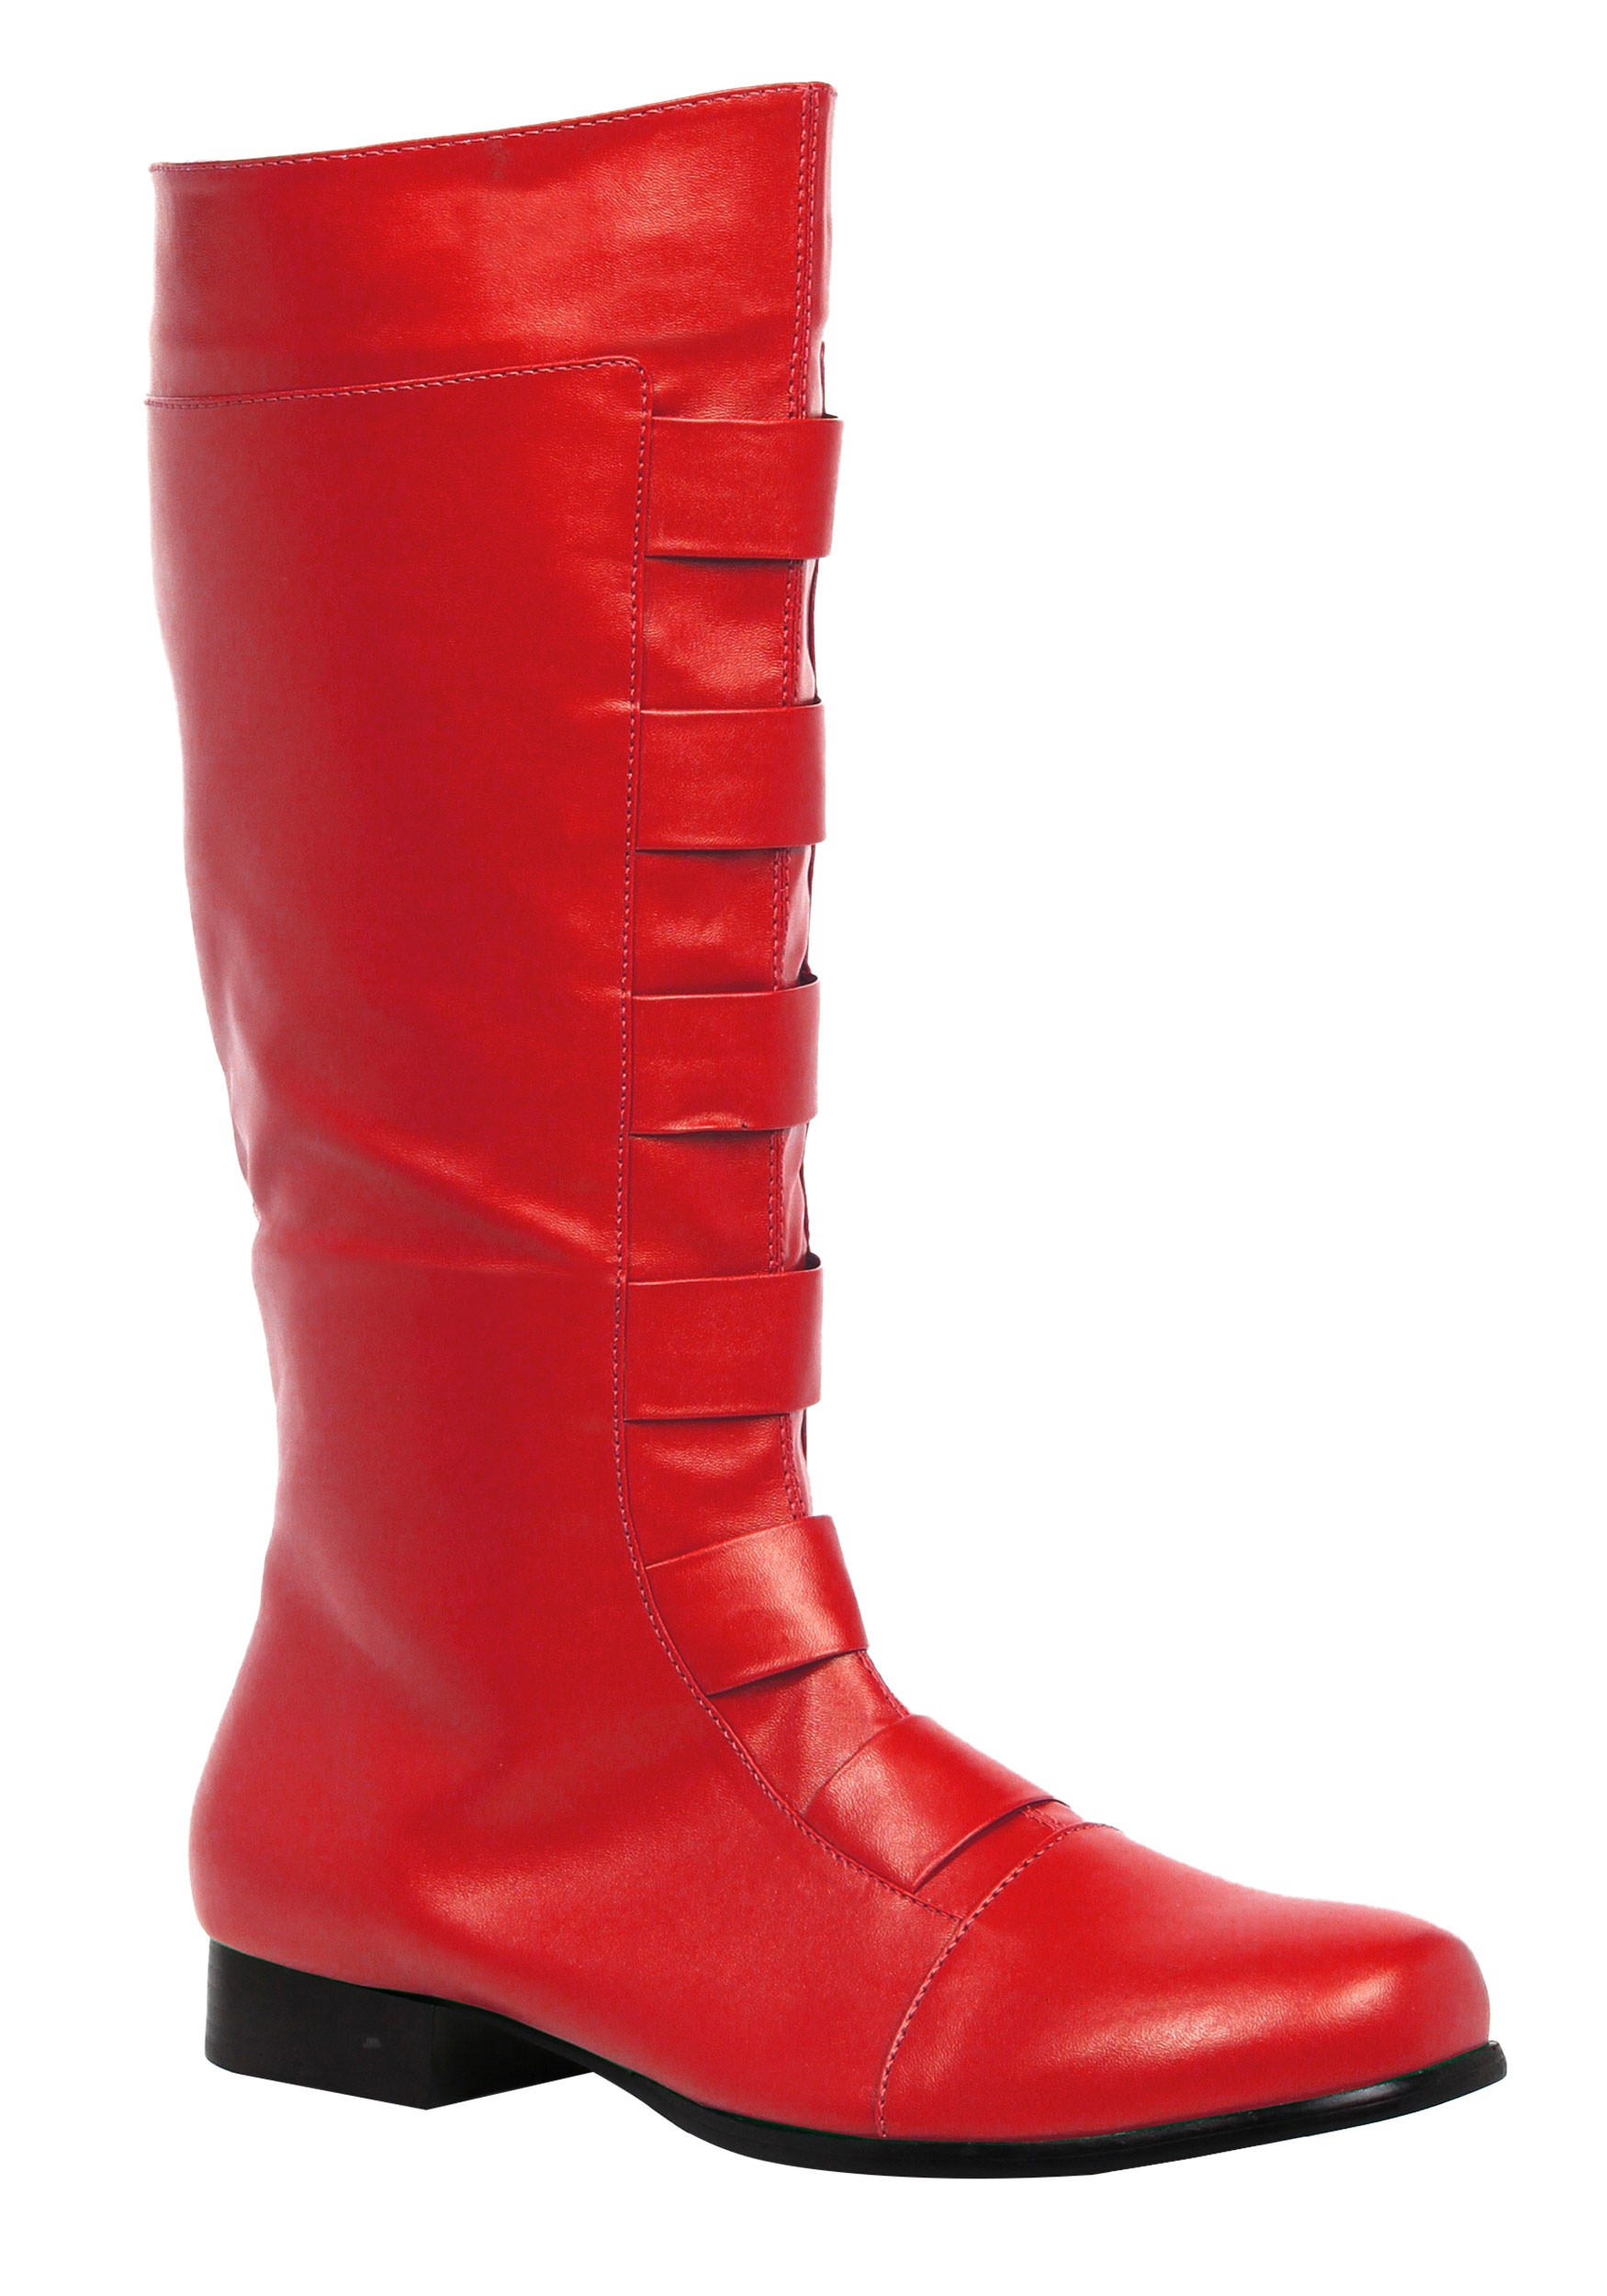 Red Superhero Adult Boots